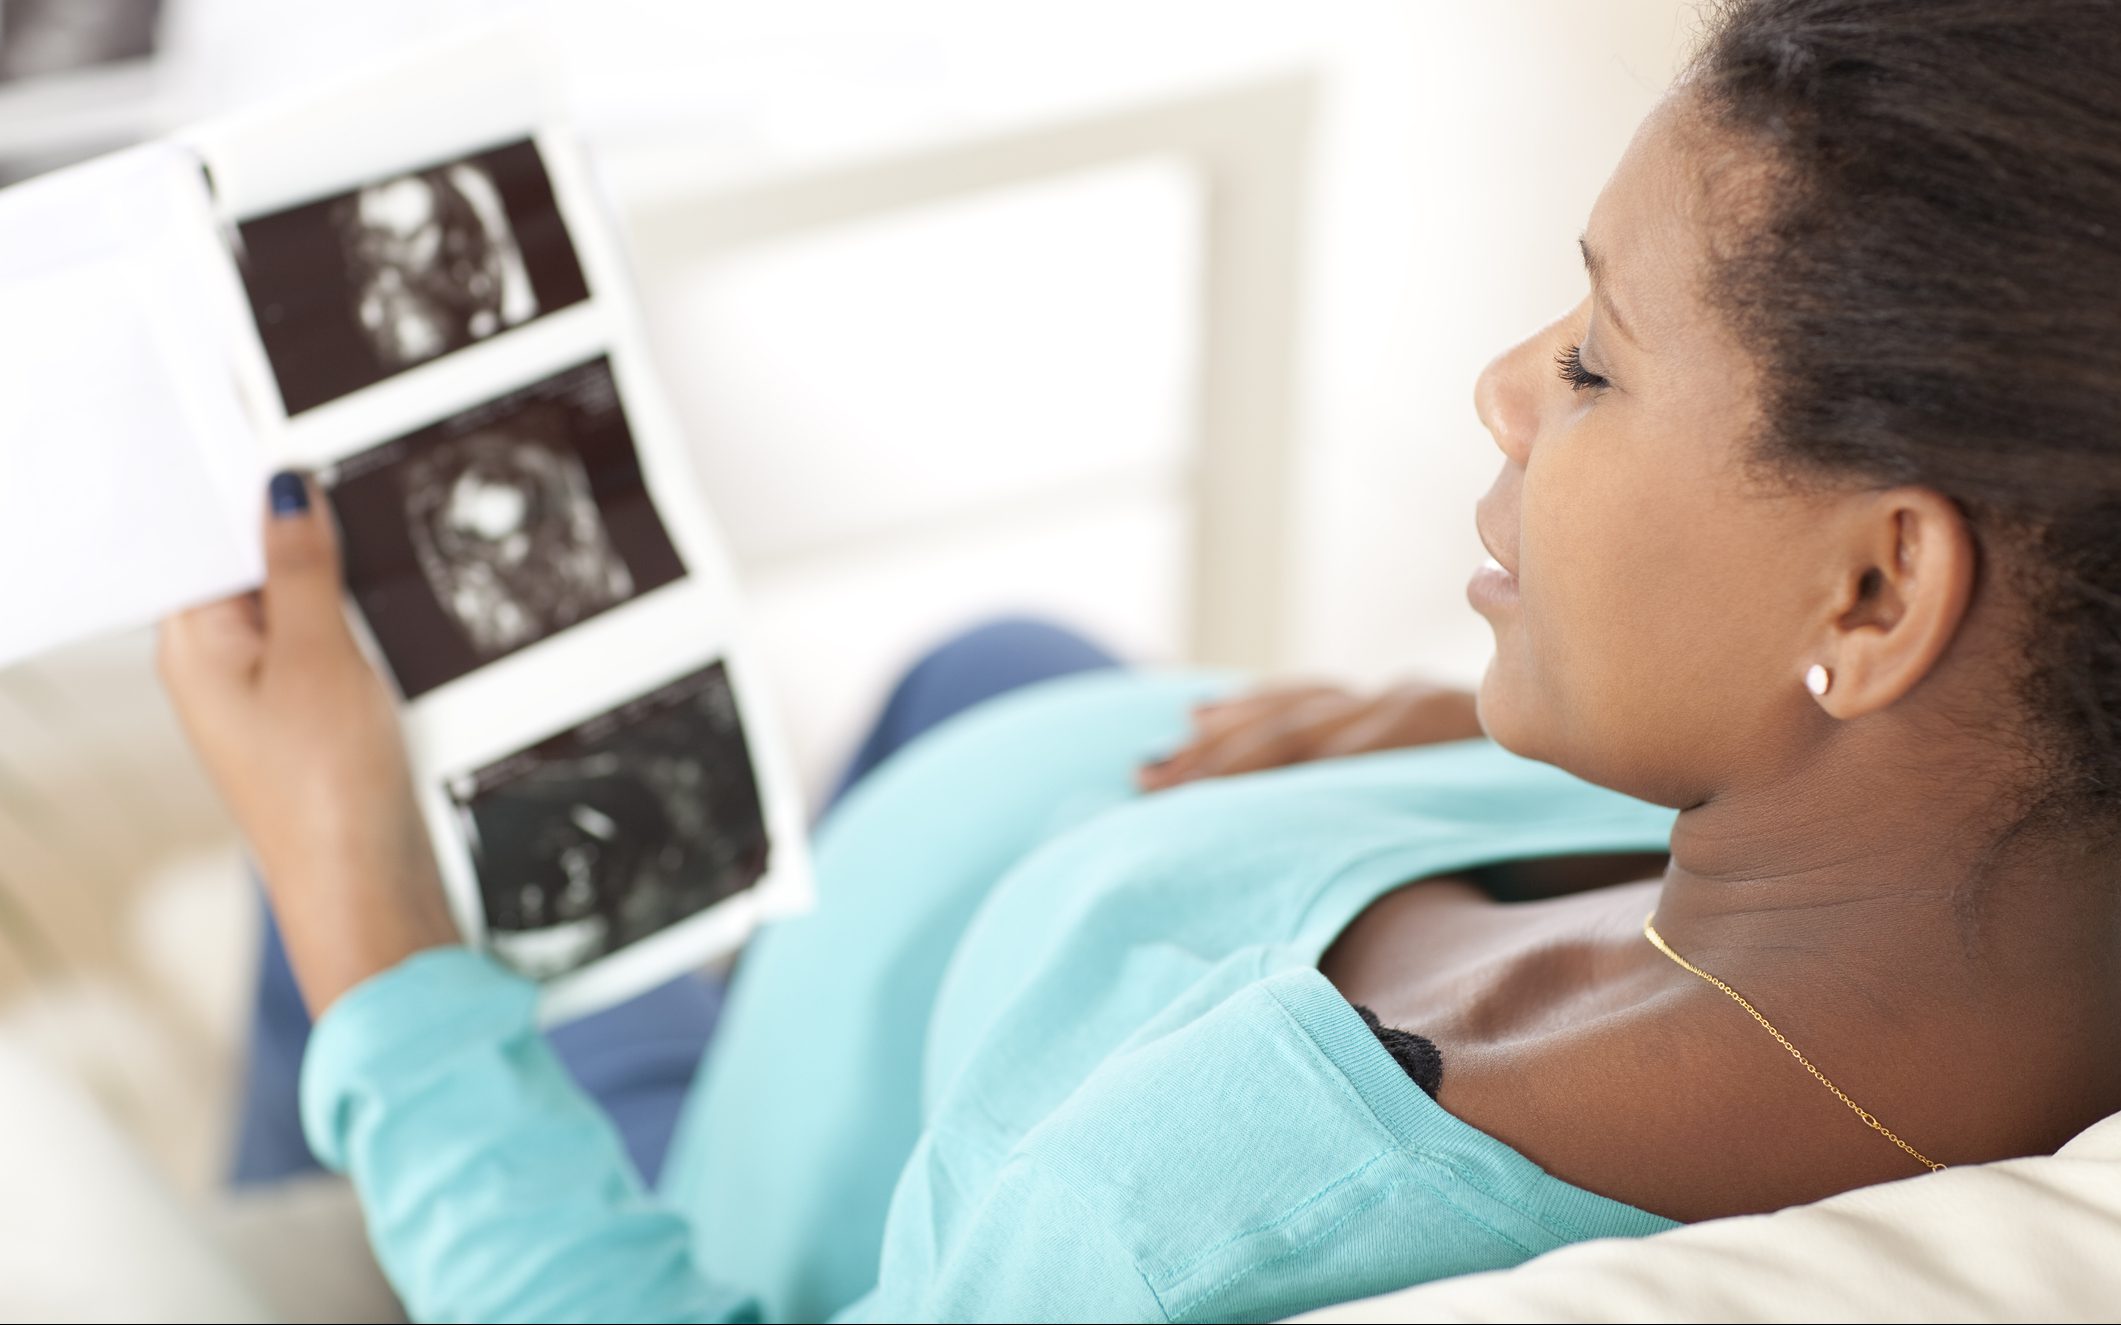 Black pregnant woman holding images of fetus